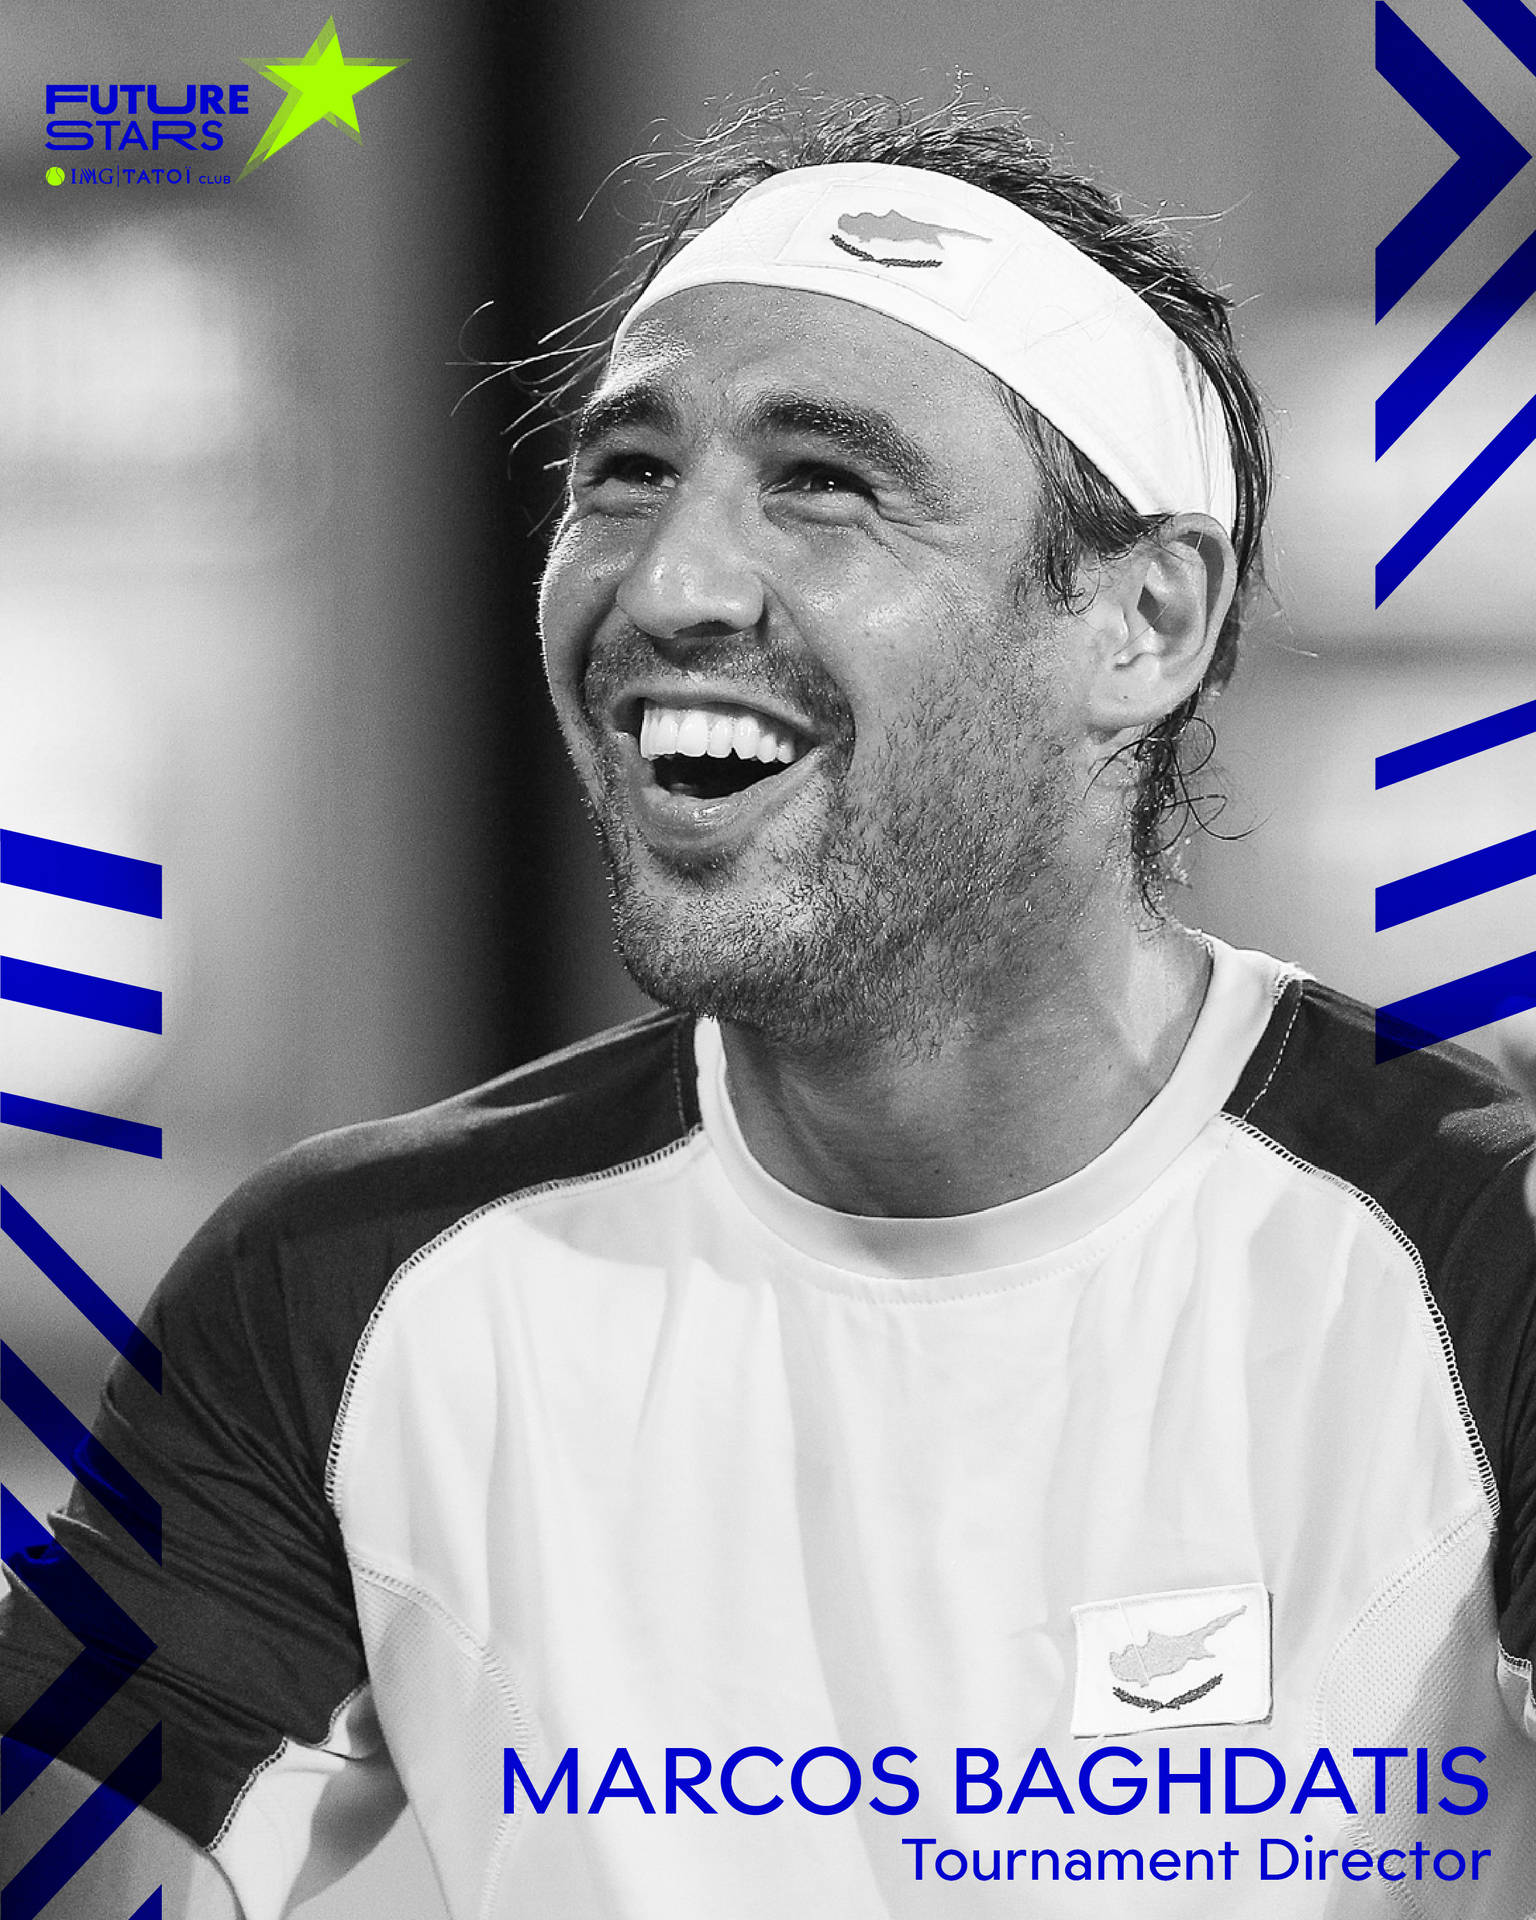 Caption: Marcos Baghdatis holding the trophy at a tennis tournament Wallpaper